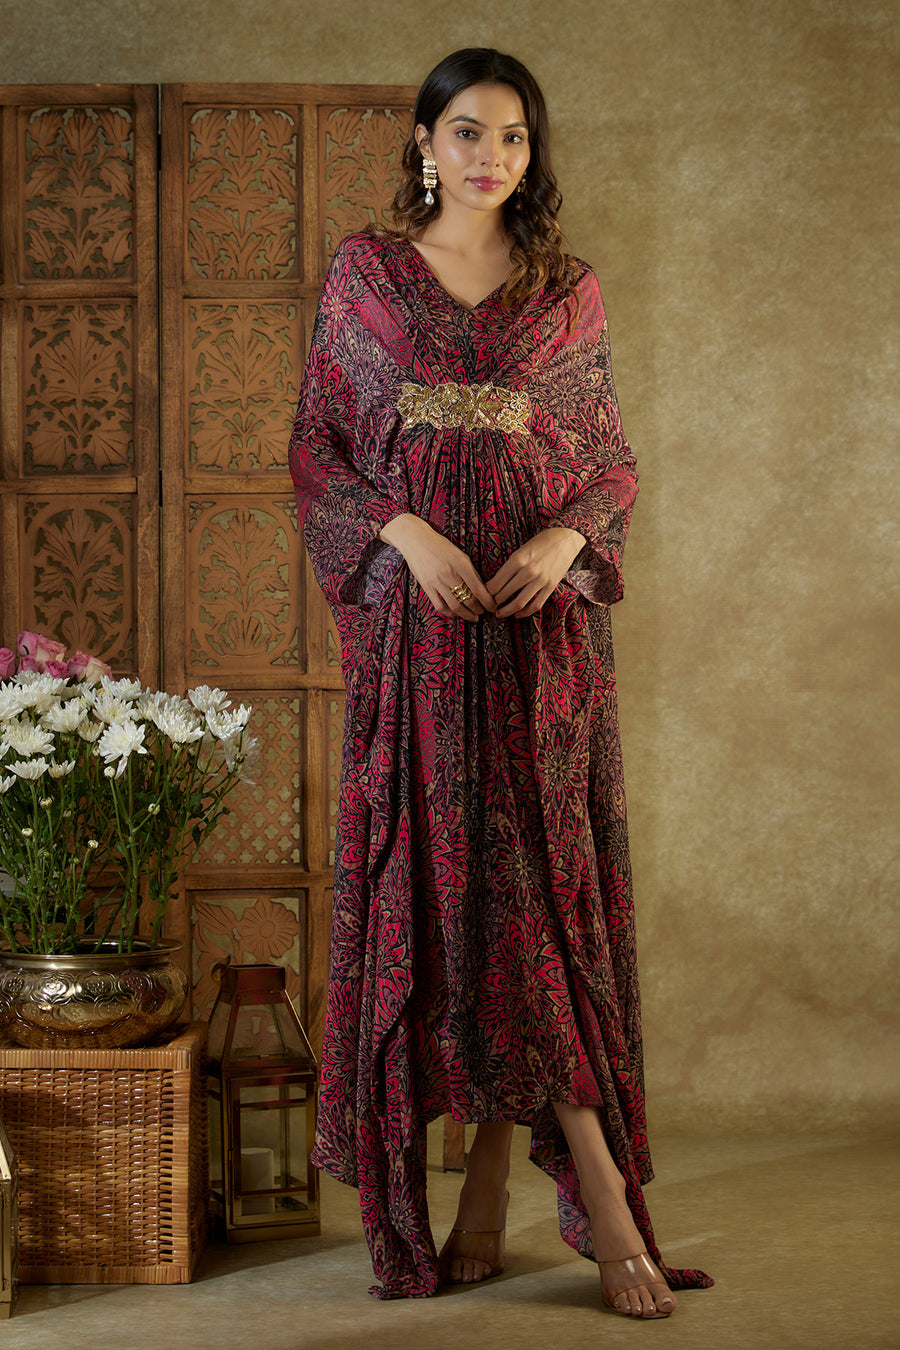 Pink printed kaftan with embroidery